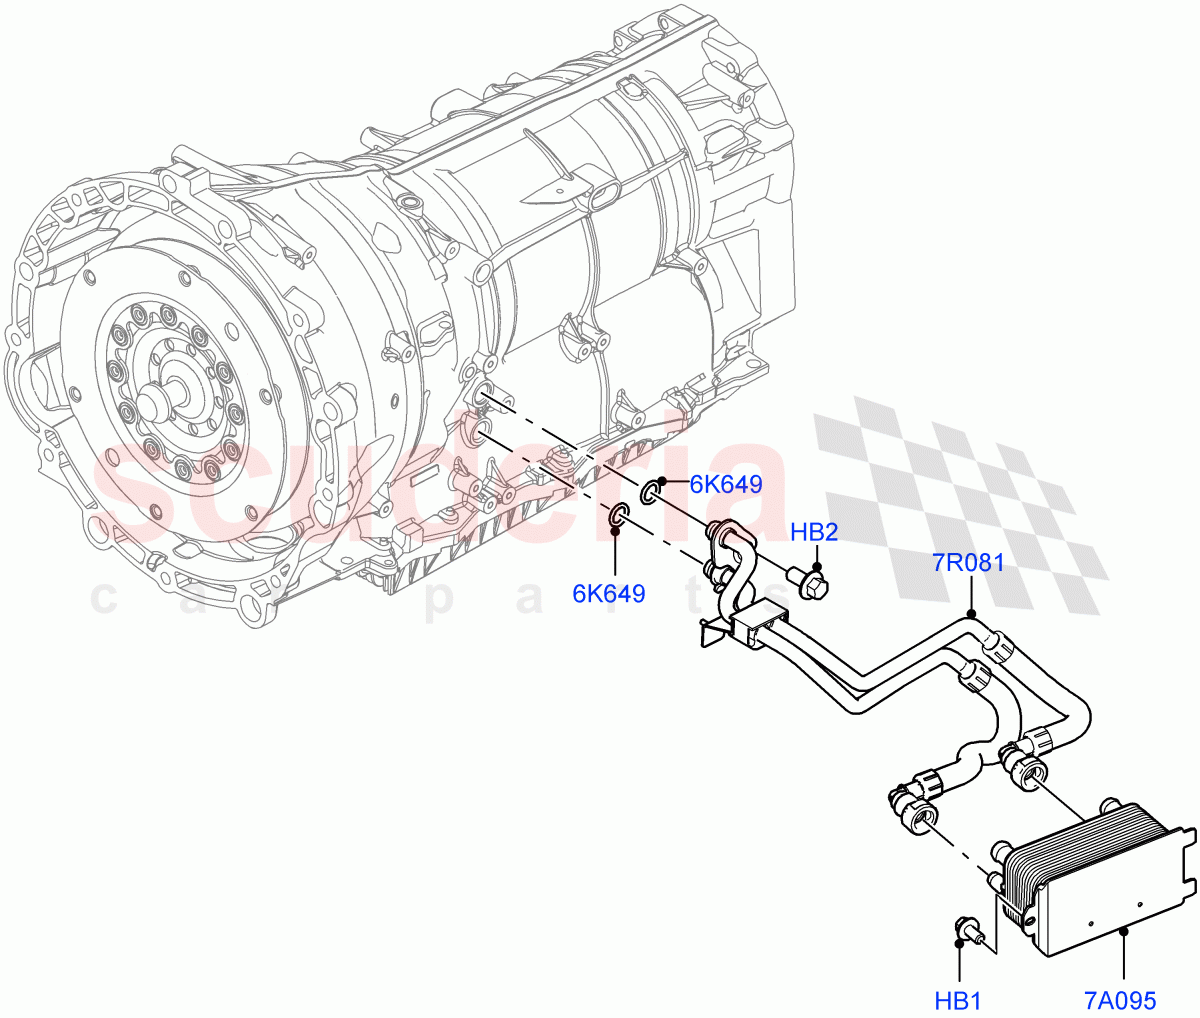 Transmission Cooling Systems(3.0L AJ20P6 Petrol High,8 Speed Auto Trans ZF 8HP76,3.0L AJ20D6 Diesel High)((V)FROMKA000001) of Land Rover Land Rover Range Rover Sport (2014+) [2.0 Turbo Petrol AJ200P]